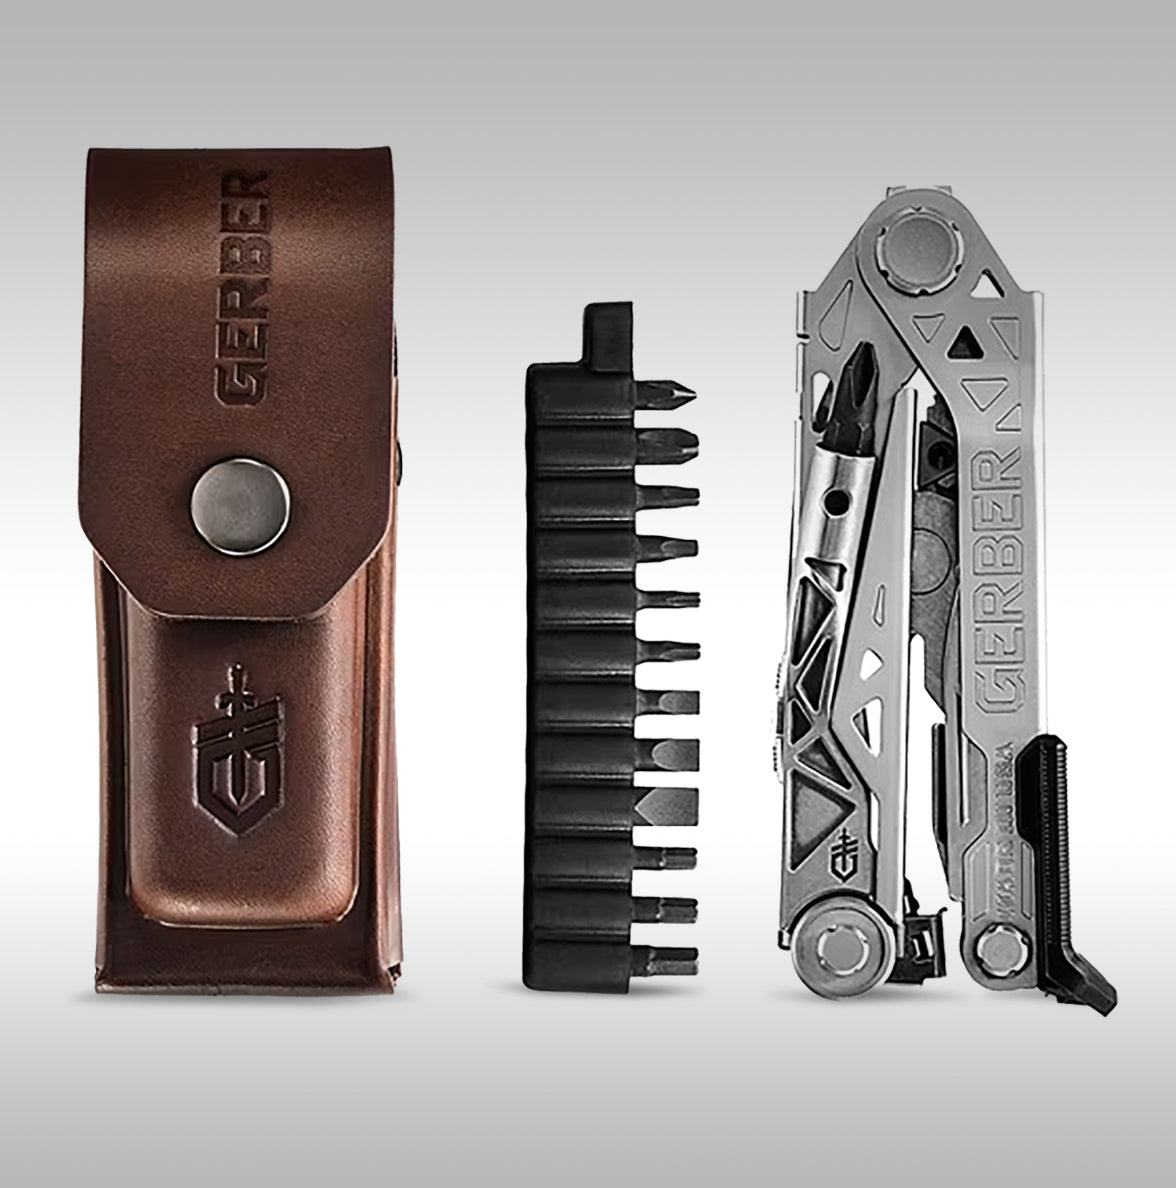 Gerber Center Drive Plus Multitool. USA made tools that are great on any motorcycle trip.